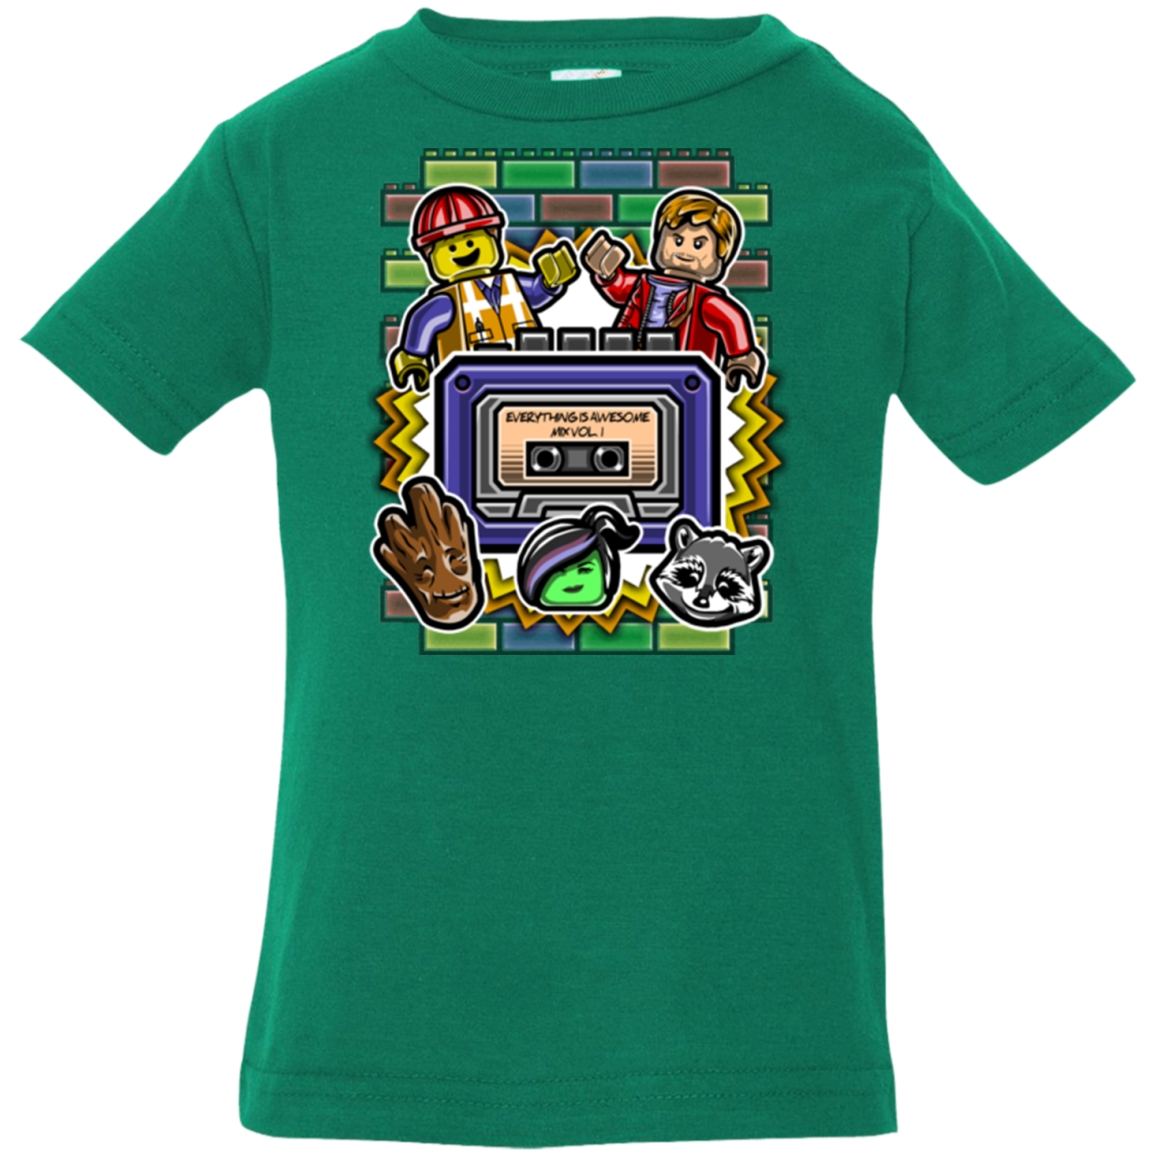 Everything is awesome mix Infant PremiumT-Shirt